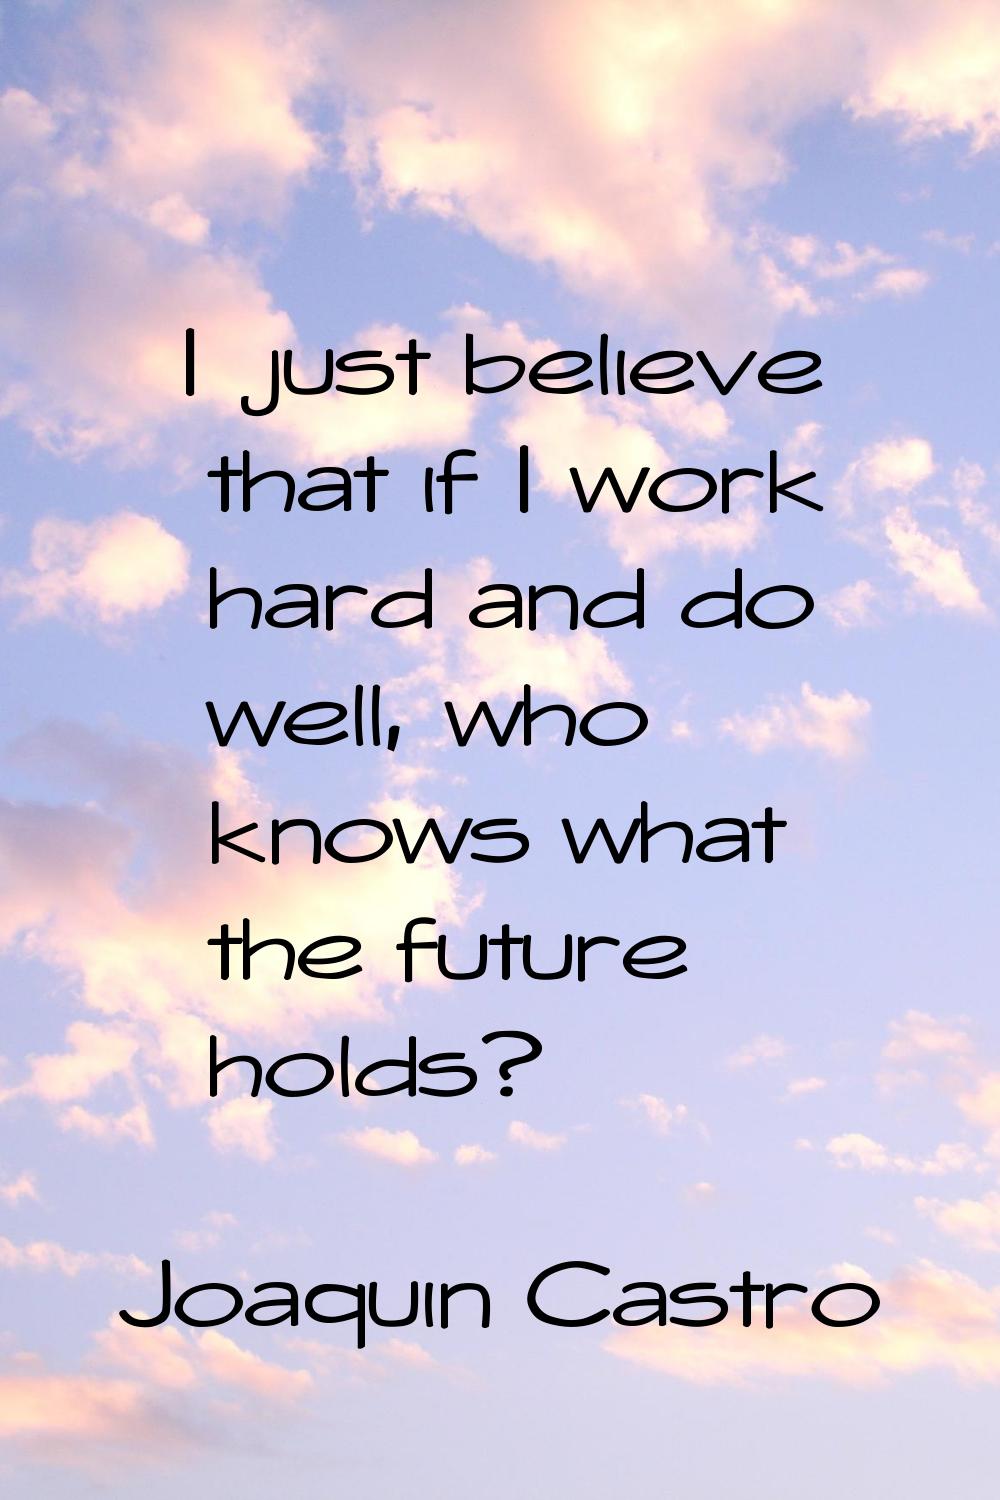 I just believe that if I work hard and do well, who knows what the future holds?